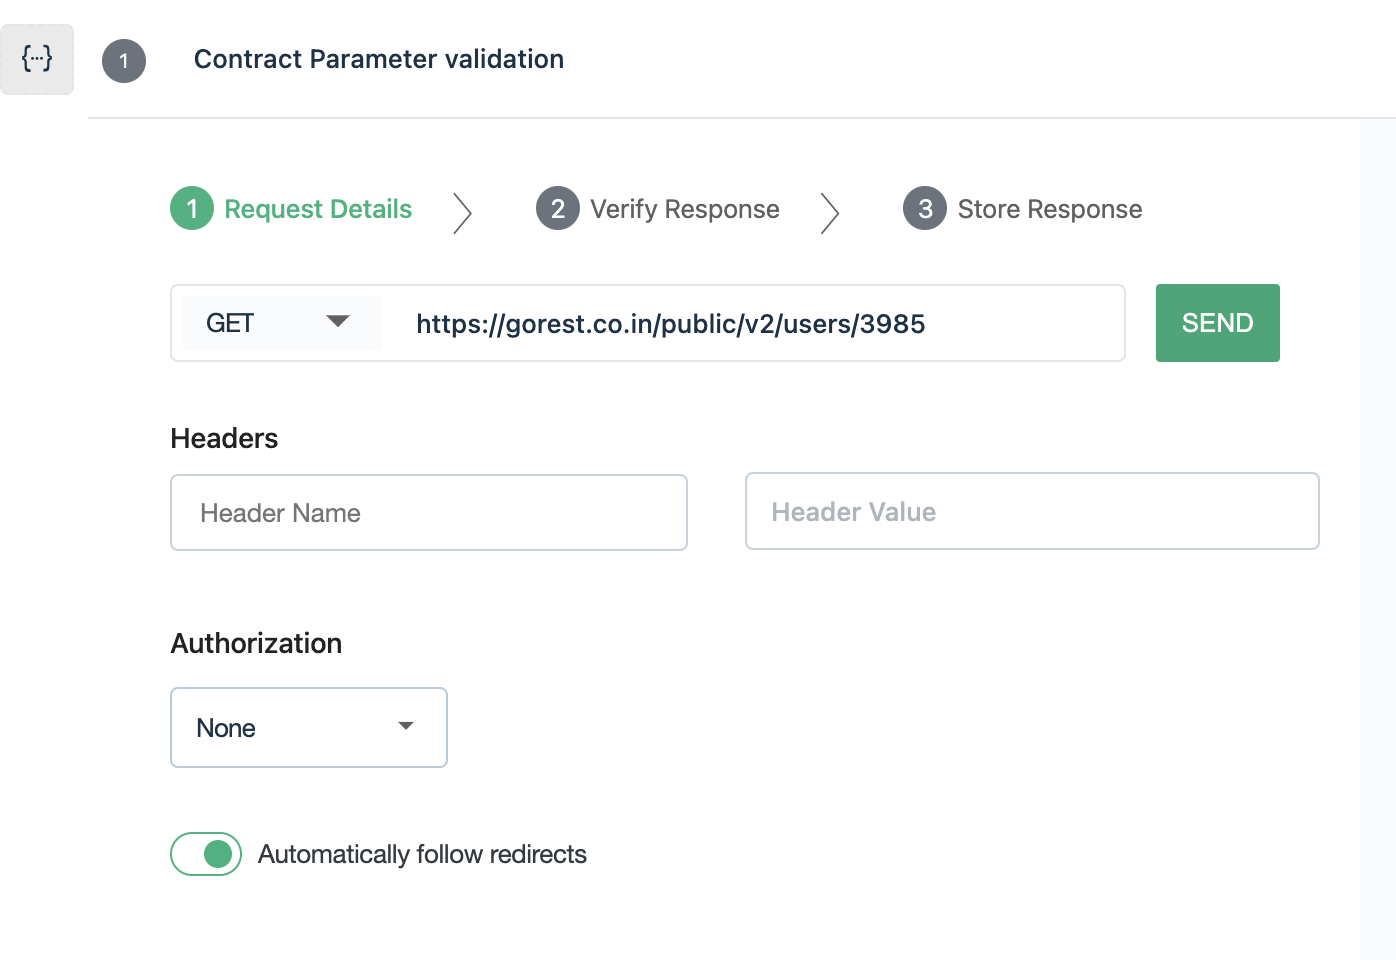 Request Details while adding a Get API to execute contract testing via Testsigma